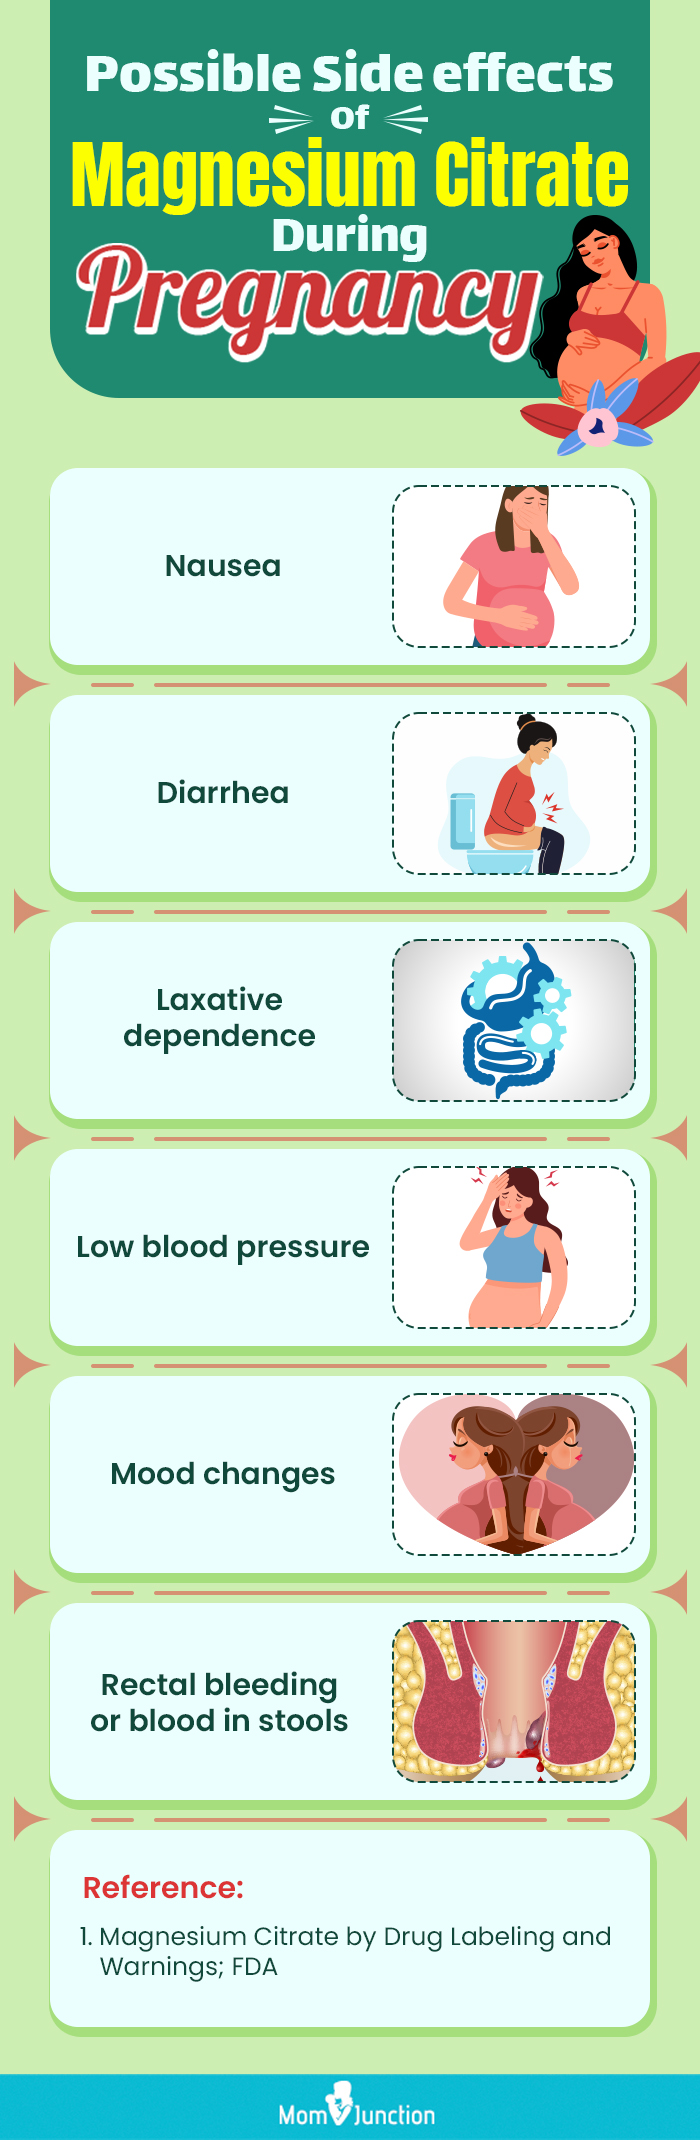 possible side effects of magnesium citrate during pregnancy (infographic)